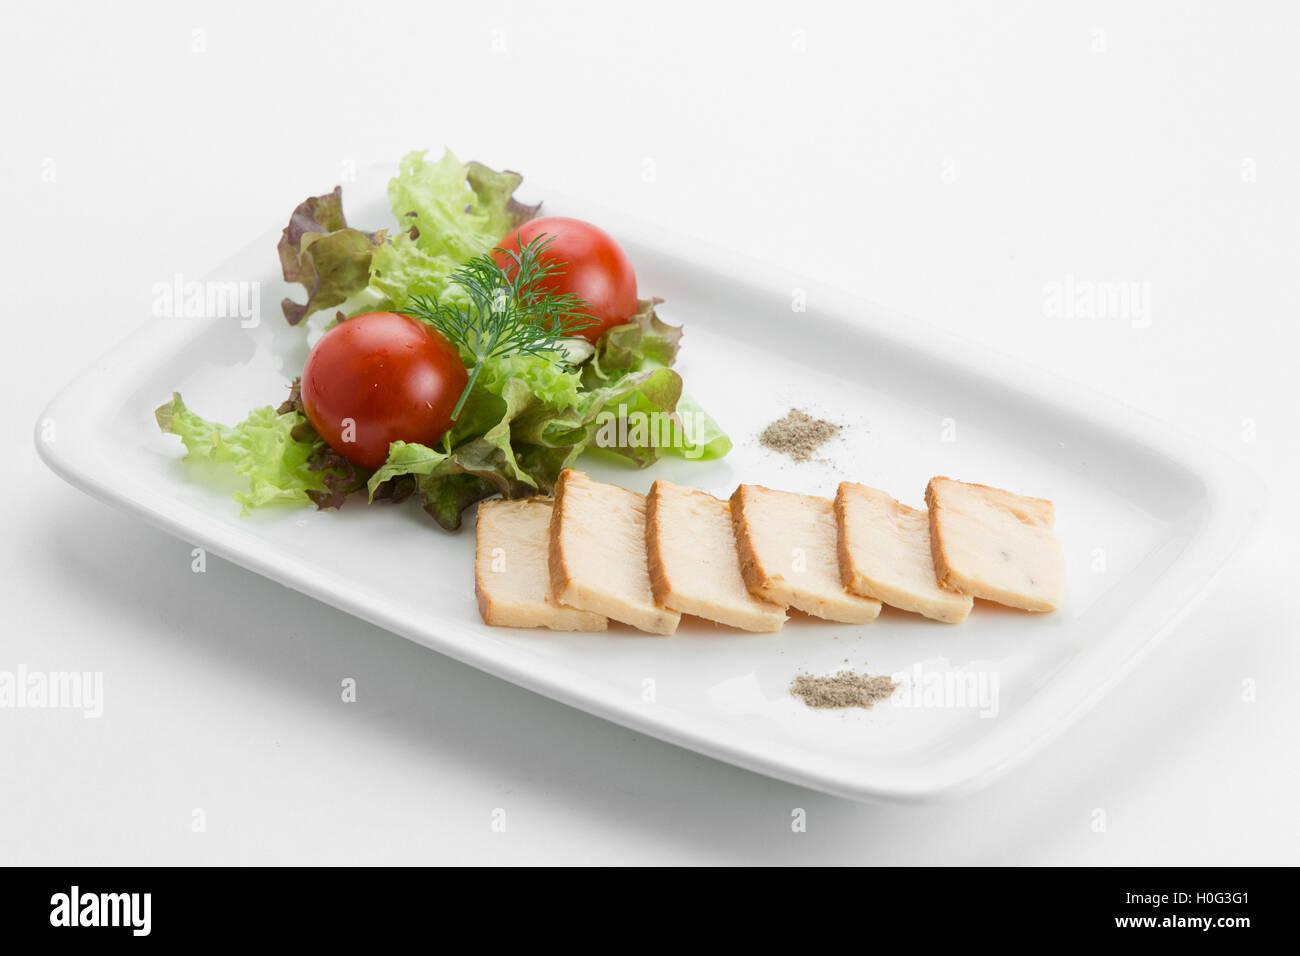 Oily fish smoked with mixed salad lettuce and tomatoes on white plate Stock Photo